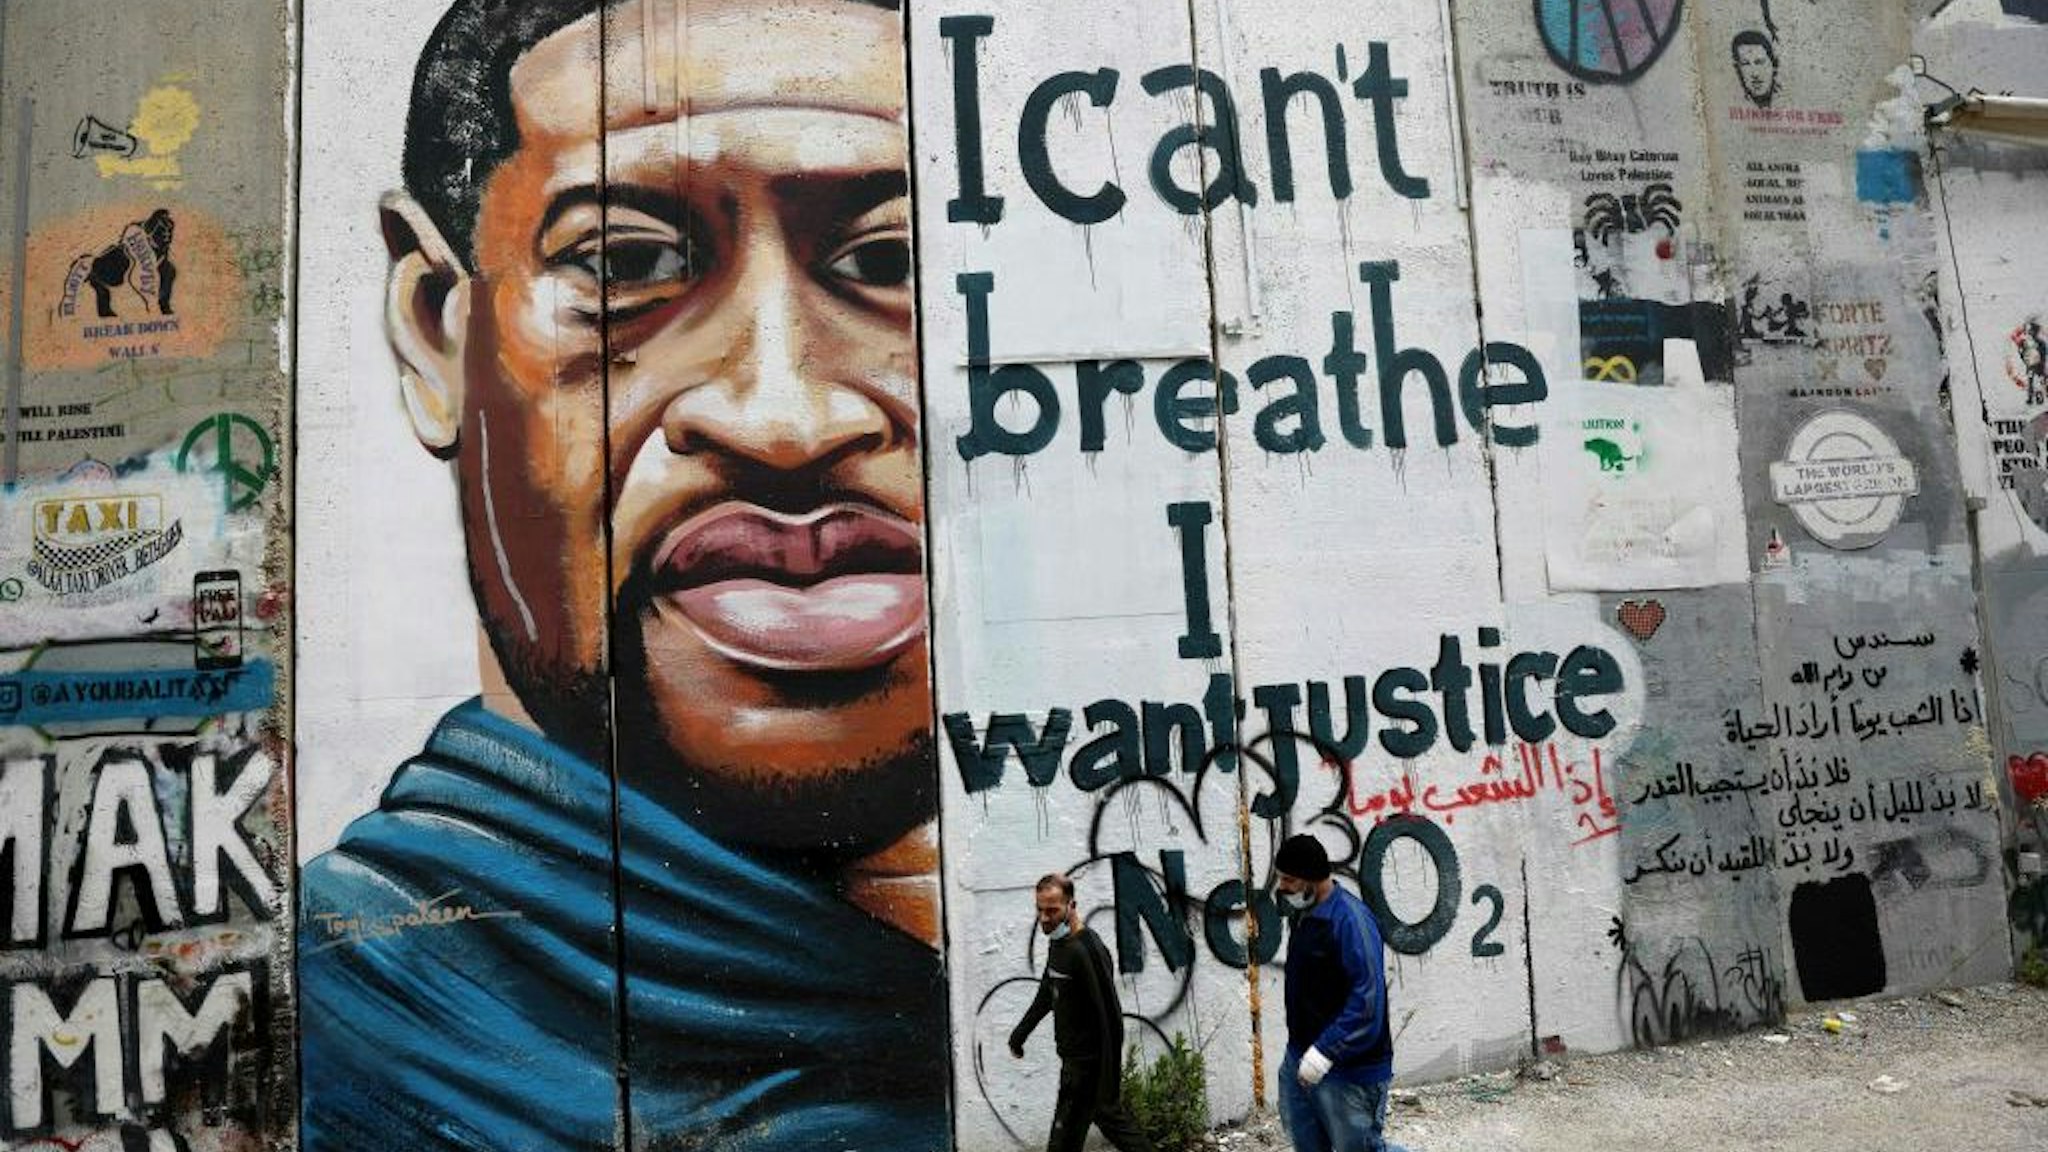 People walk past a mural showing the face of George Floyd, an unarmed handcuffed black man who died after a white policeman knelt on his neck during an arrest in the US, painted on a section of Israel's controversial separation barrier in the city of Bethlehem in the occupied West Bank on March 31, 2021. (Photo by Emmanuel DUNAND / AFP) (Photo by EMMANUEL DUNAND/AFP via Getty Images)